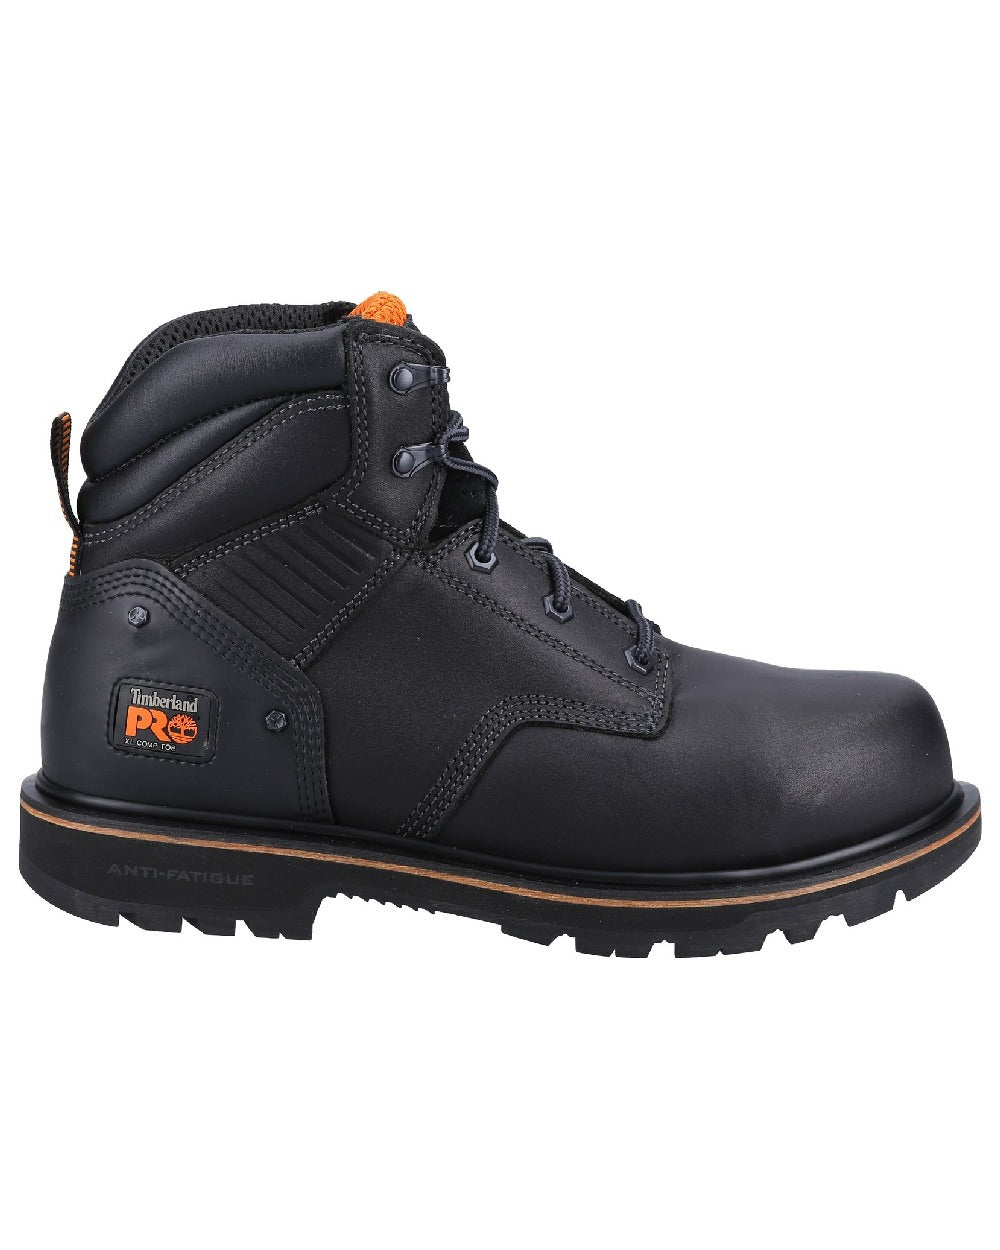 Black coloured Timberland Pro Ballast Safety Boots on white background 